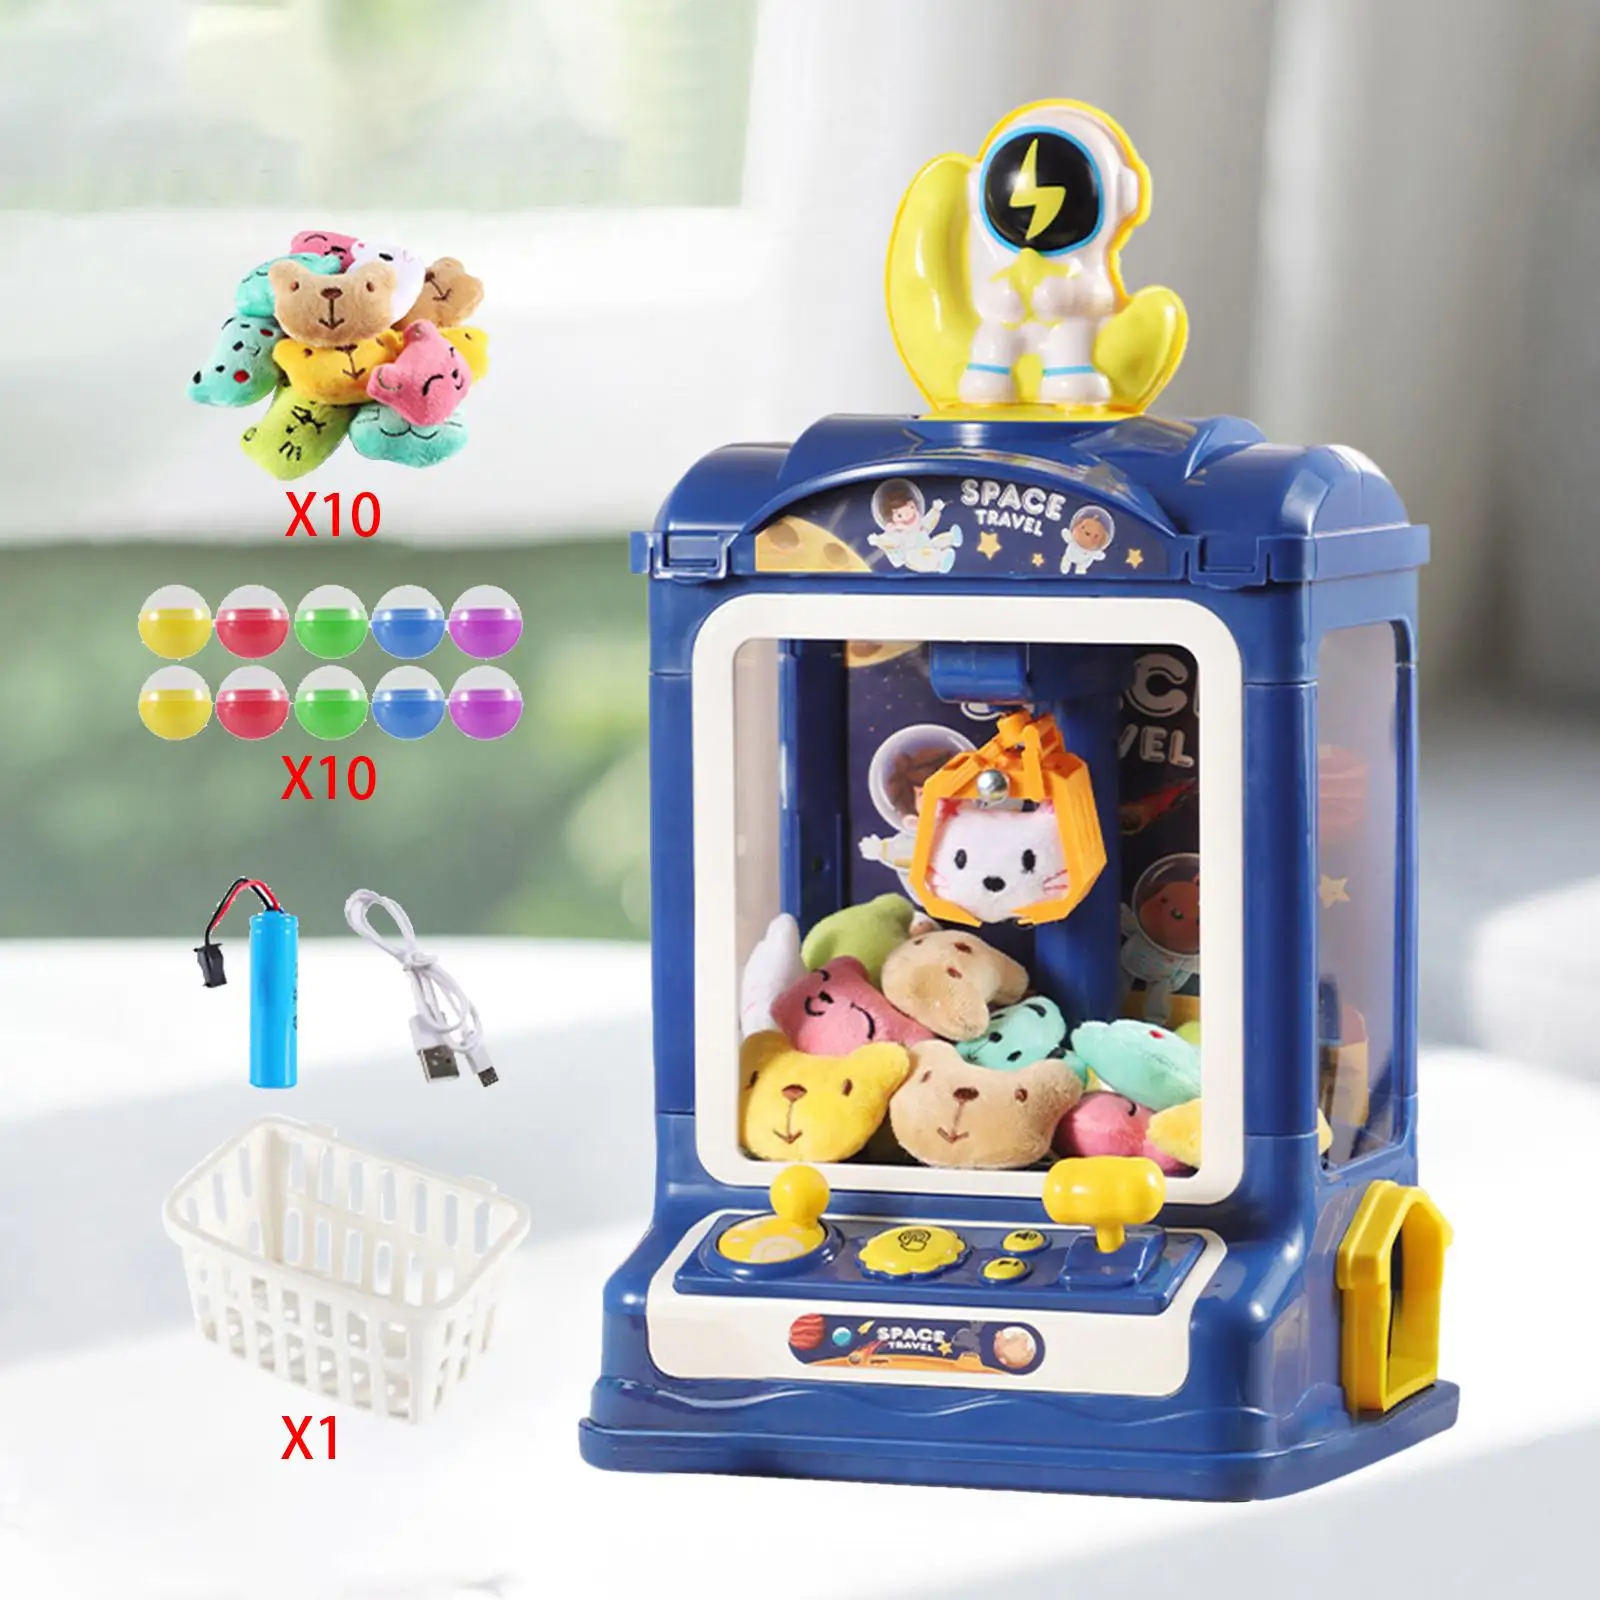 Kids Claw Machine Small Claw Game Grabbing Machine for Children Boys Gifts